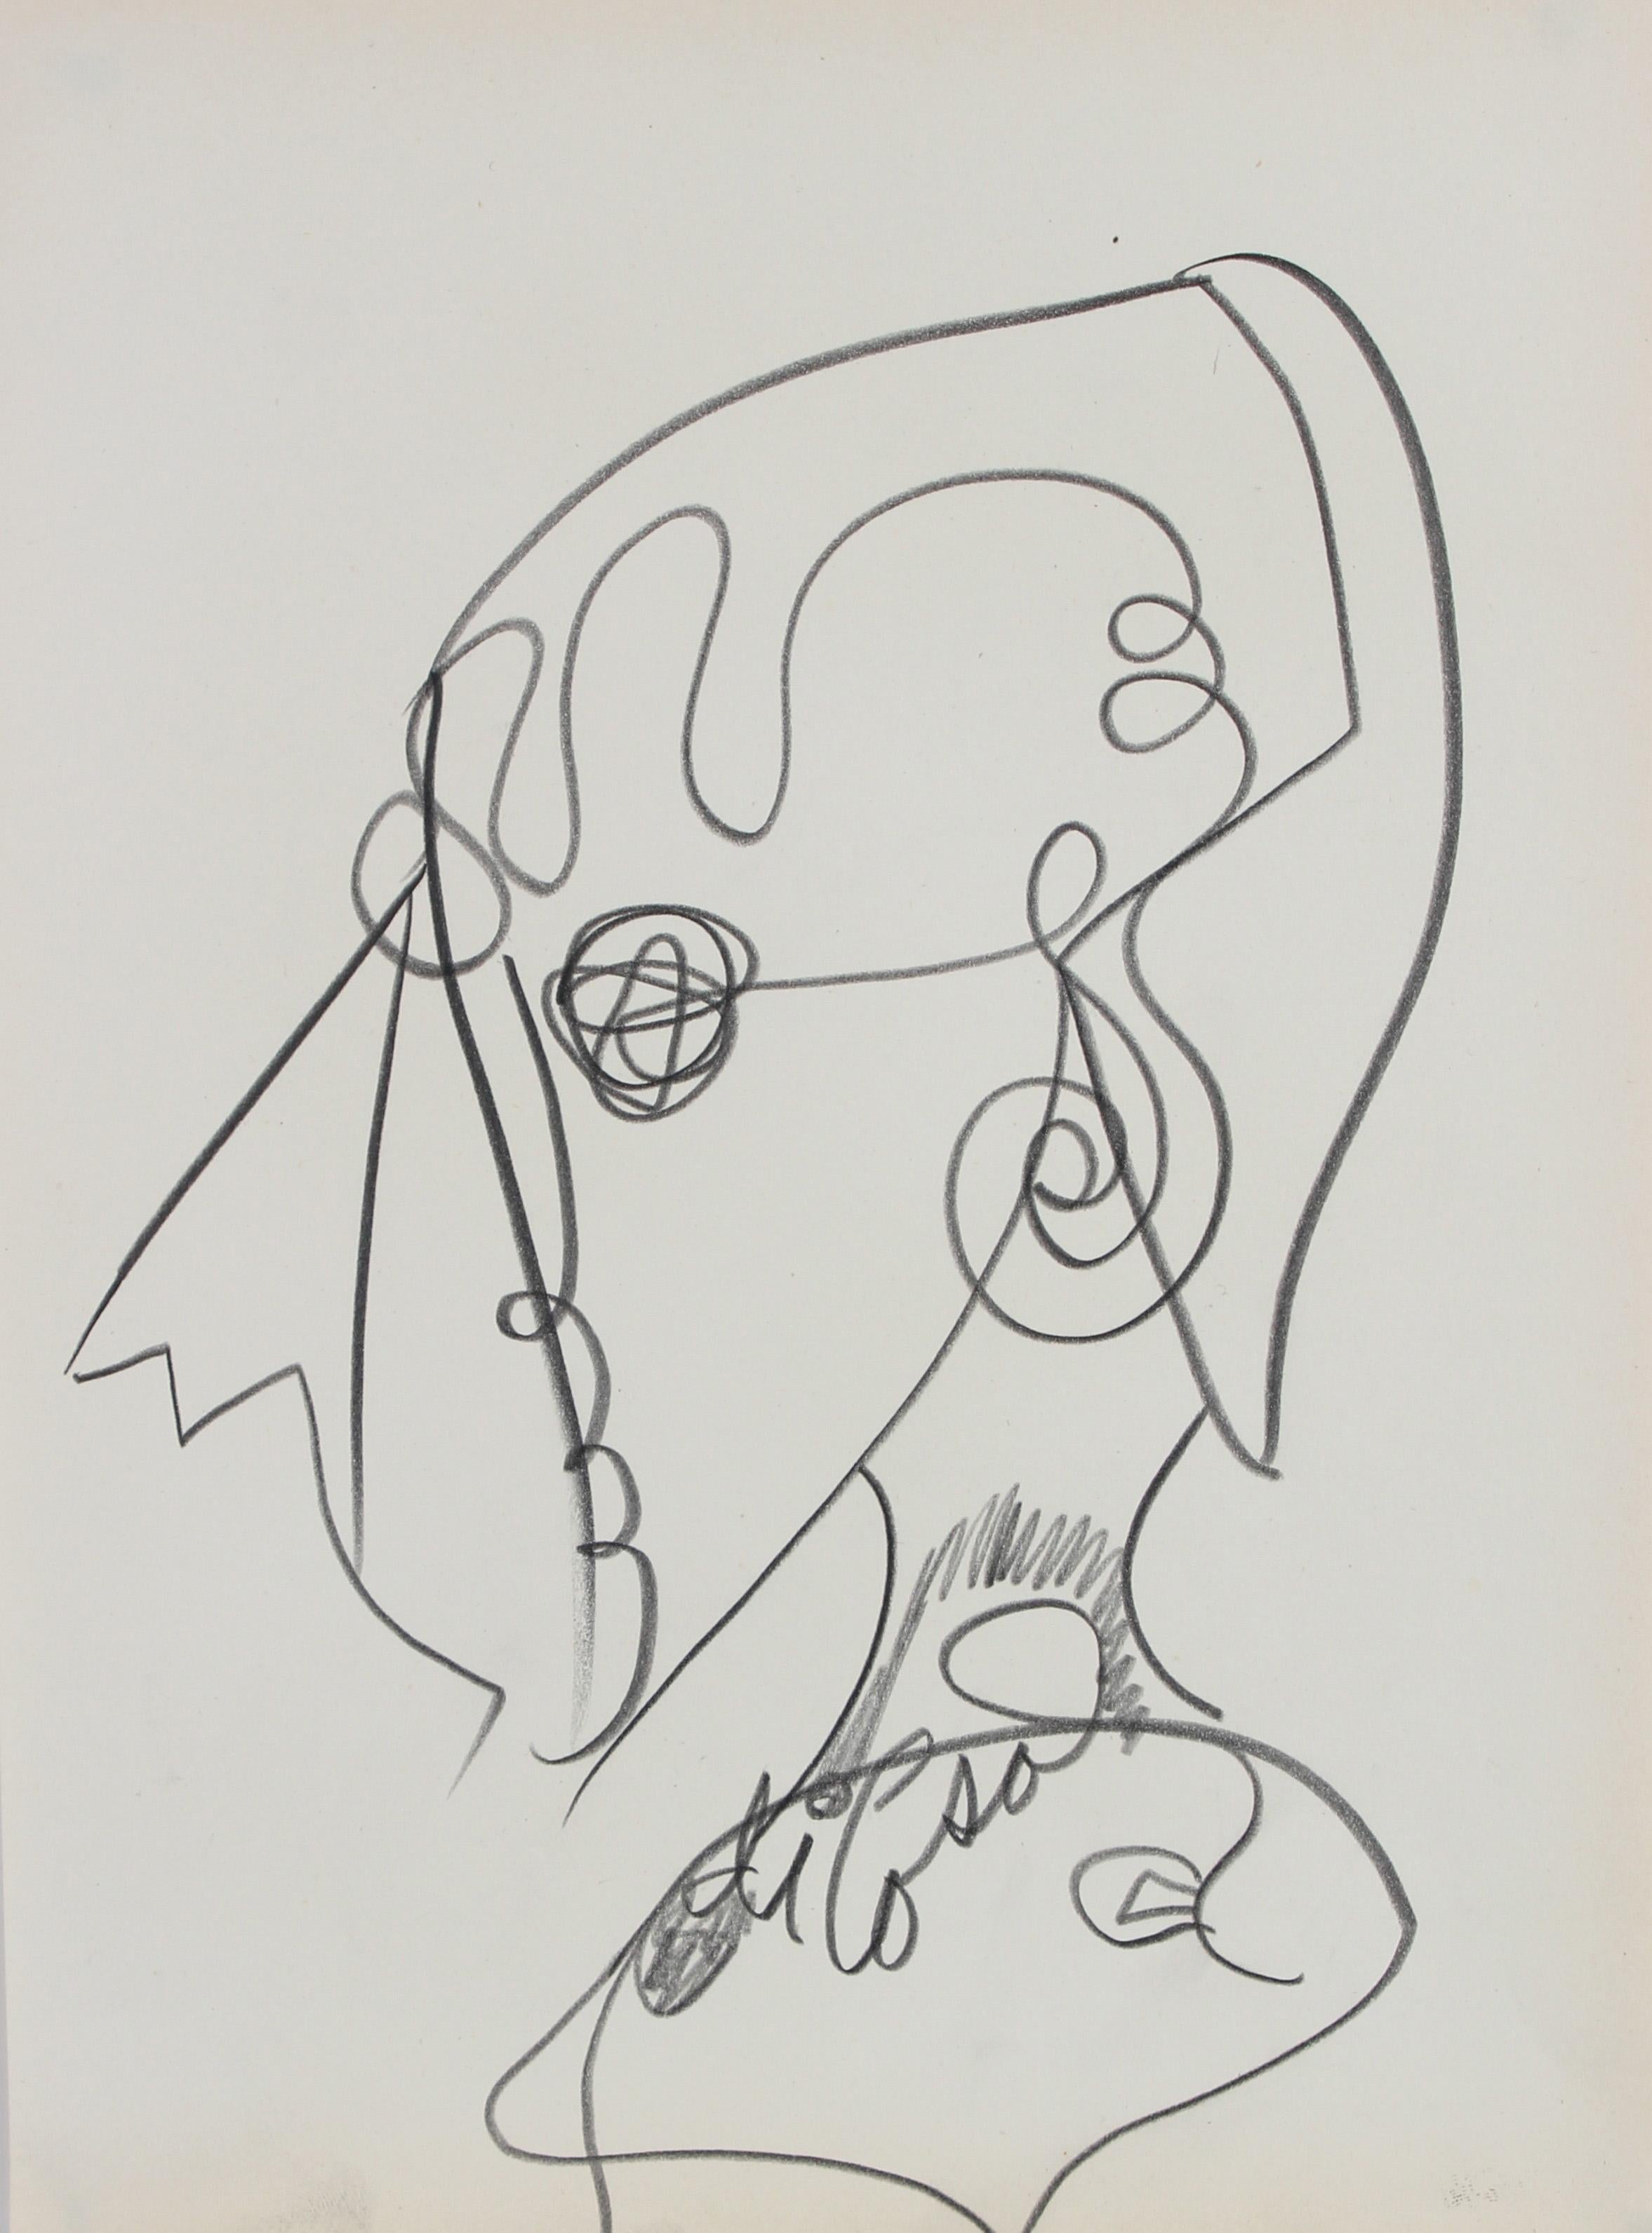 Michael di Cosola Abstract Drawing - Abstracted Psychedelic Portrait in Graphite, Late 20th Century